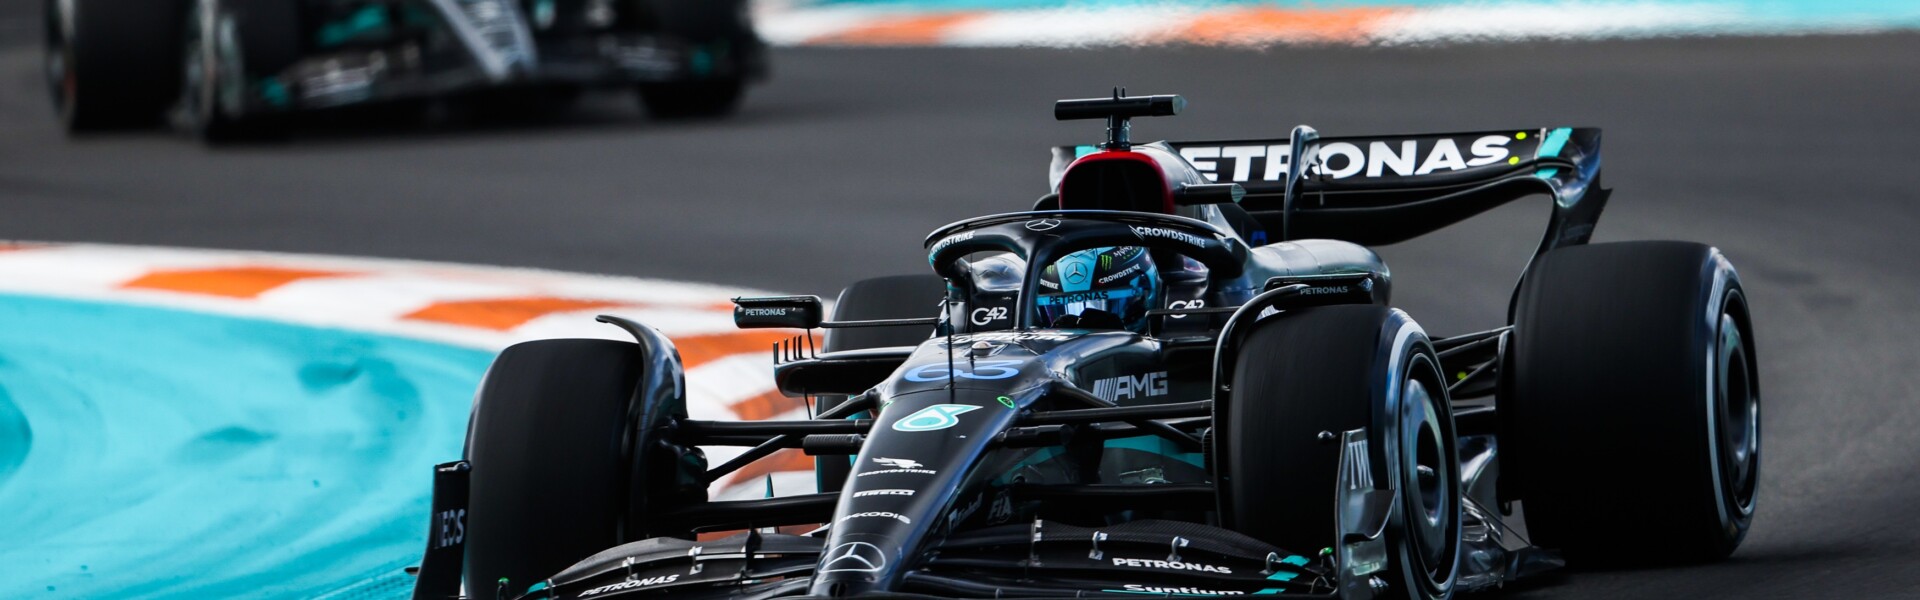 SAP and the Mercedes-AMG PETRONAS F1 Team Join Forces to Drive Efficiency On and Off the Racetrack